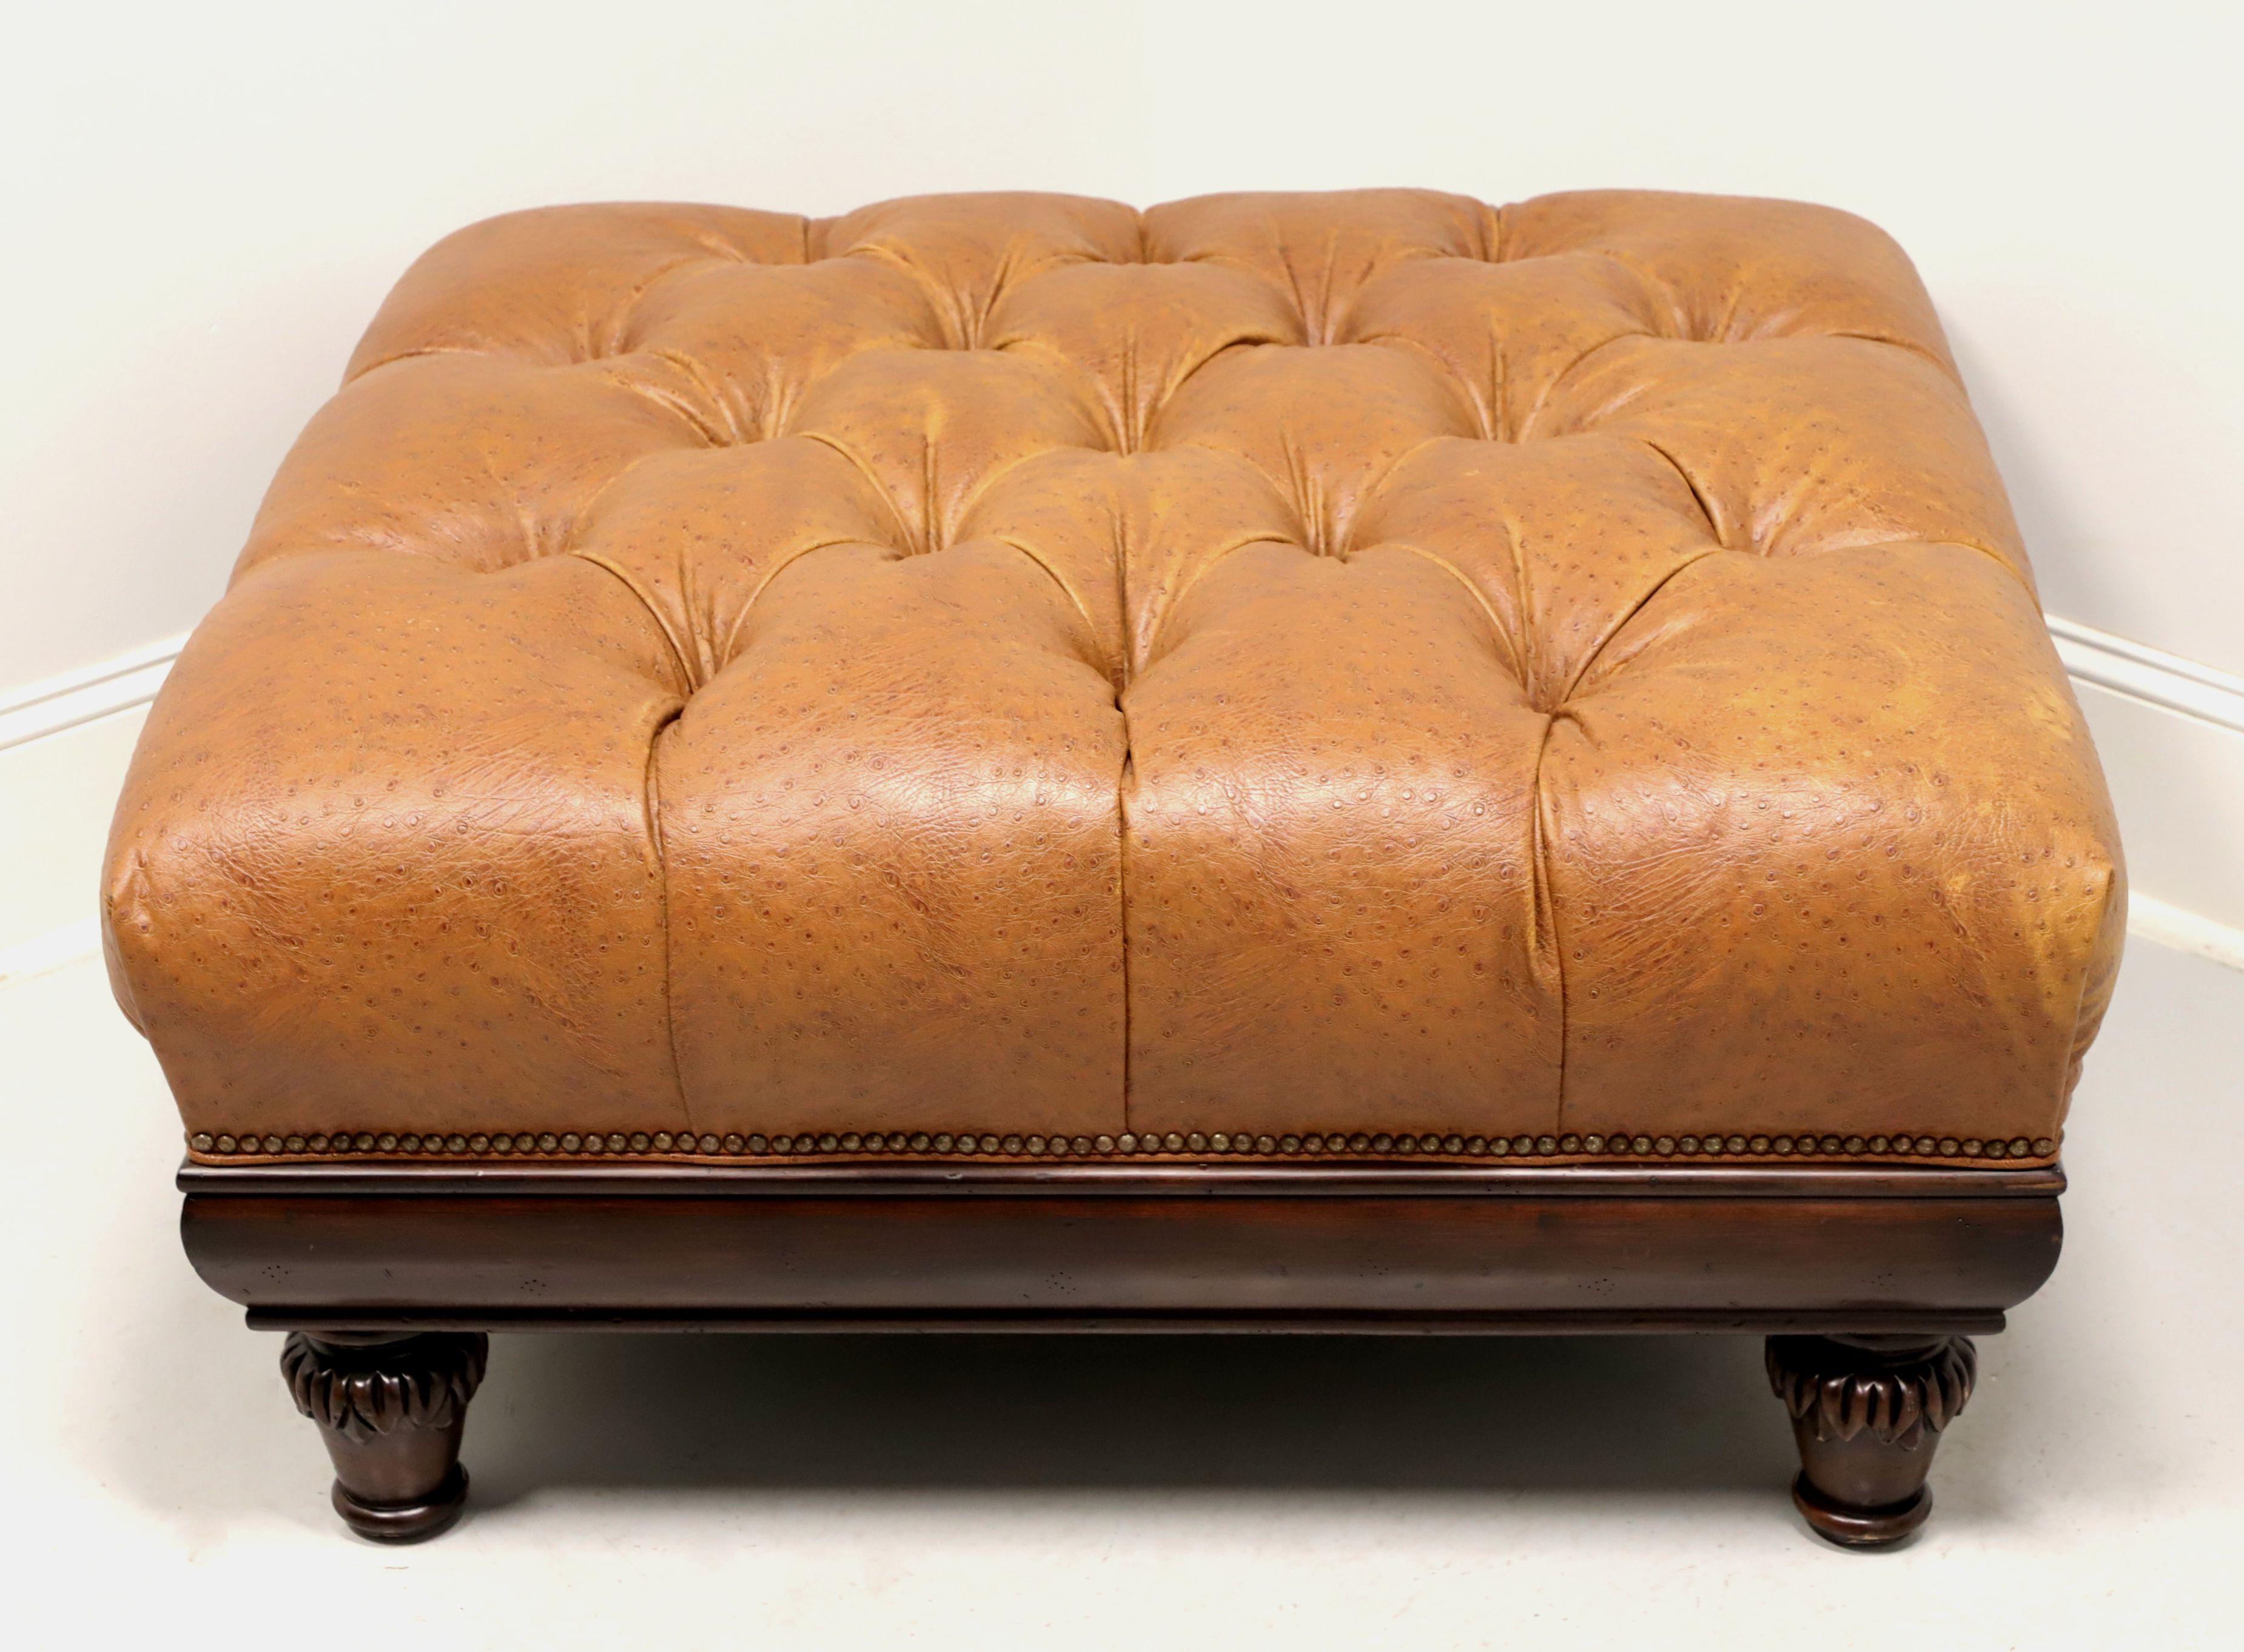 A square leather ottoman in the Regency style by Hancock & Moore. Distressed walnut frame, caramel color ostrich leather, button tufted, brass nailhead trim, crown molding like apron and decoratively carved turnip feet. Made in North Carolina, USA,